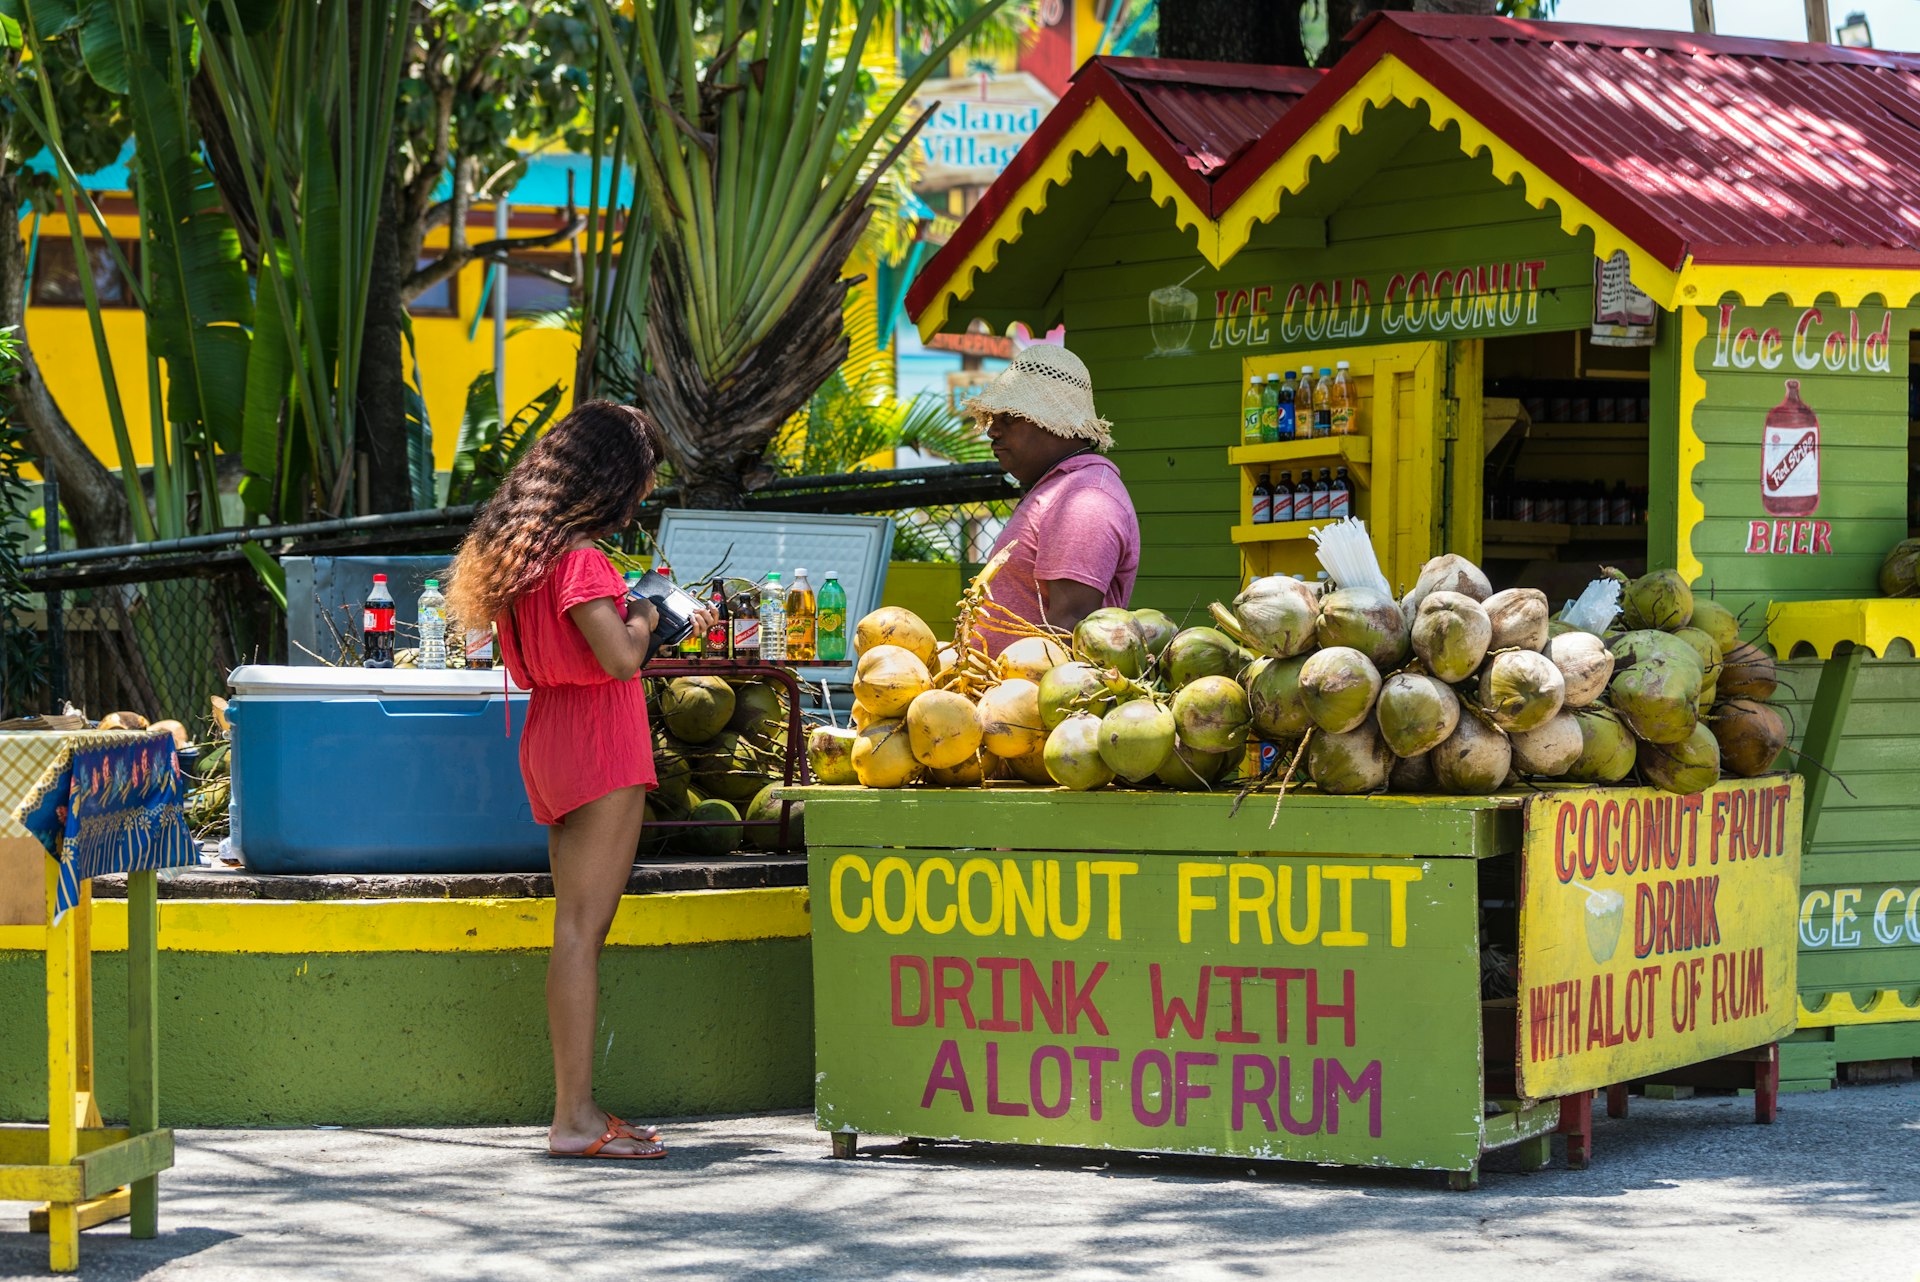 Ice Cold Coconut Fruit Drink with Rum stall/corner shop at the Ocho Rios Cruise Ship Port in the streets of Ocho Rio